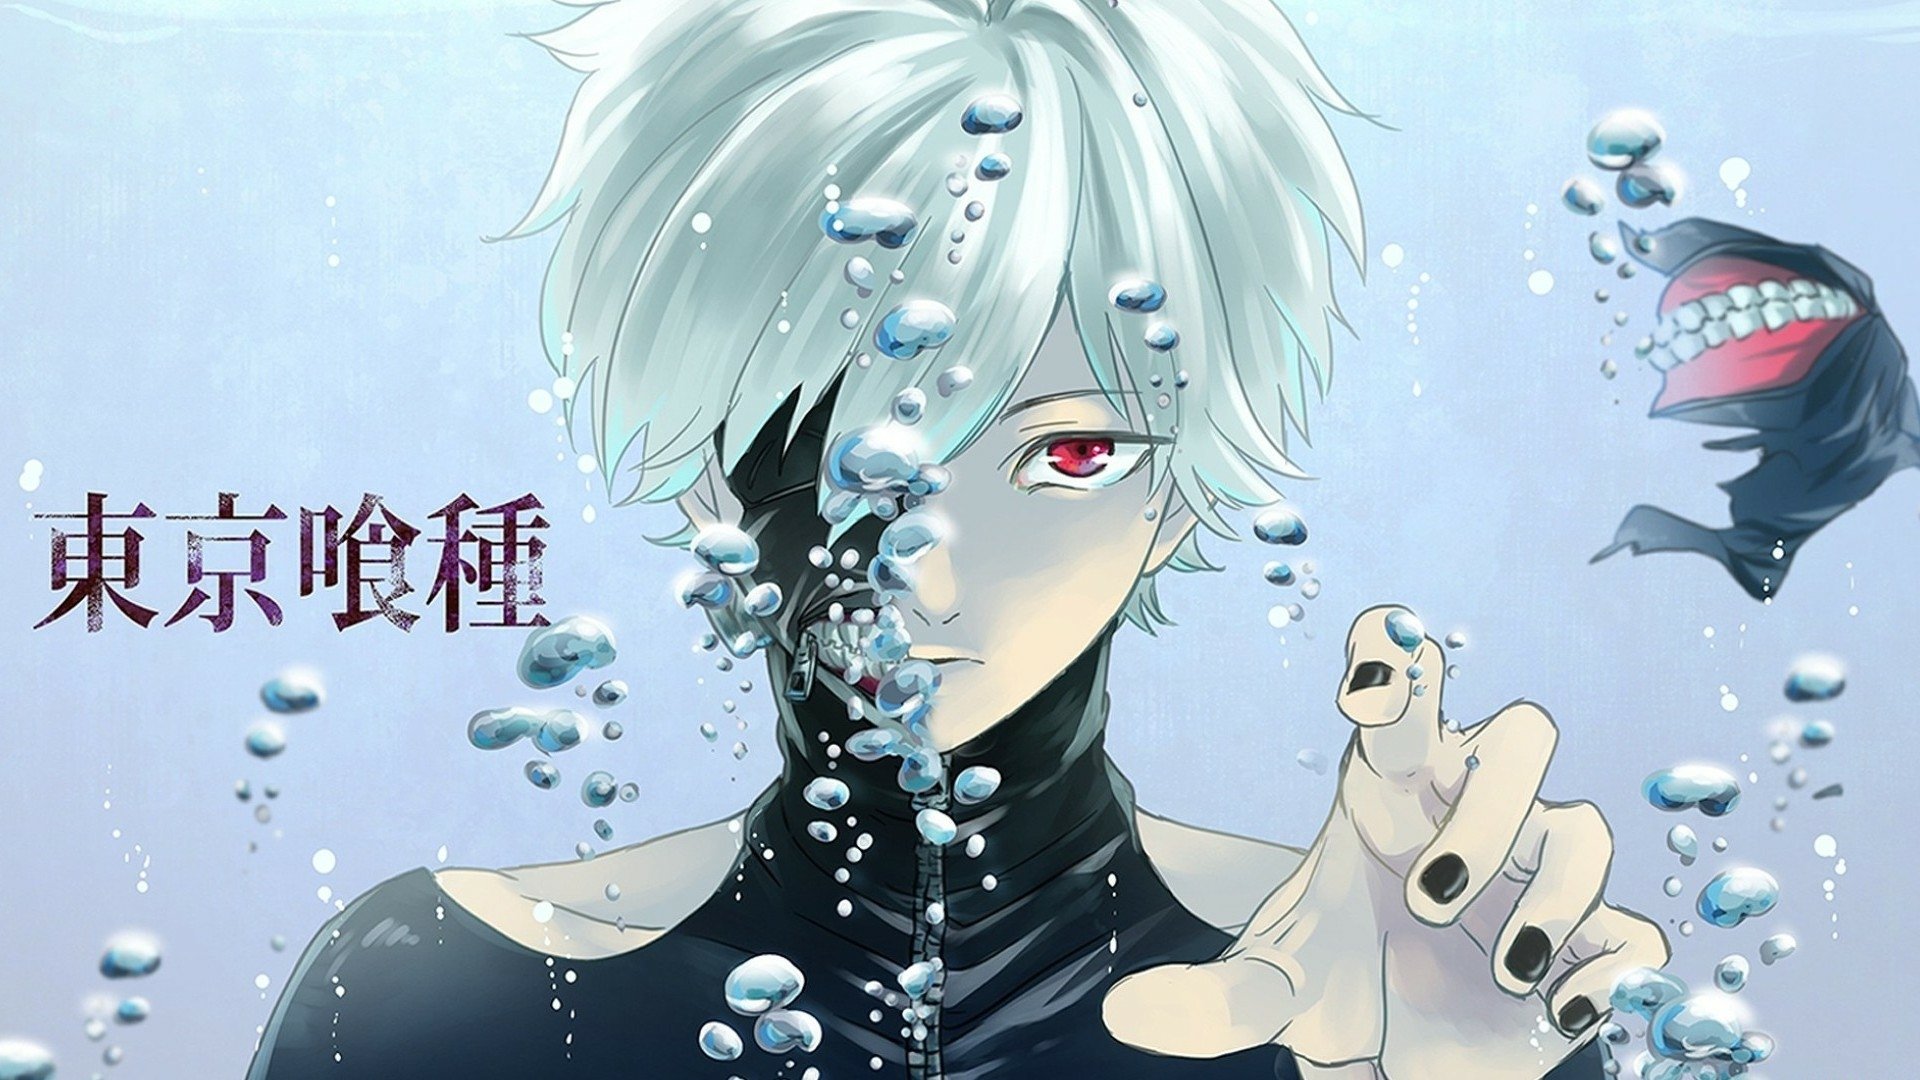 HD desktop wallpaper featuring Ken Kaneki from Tokyo Ghoul, with white hair and submerged in water, highlighted by floating bubbles.